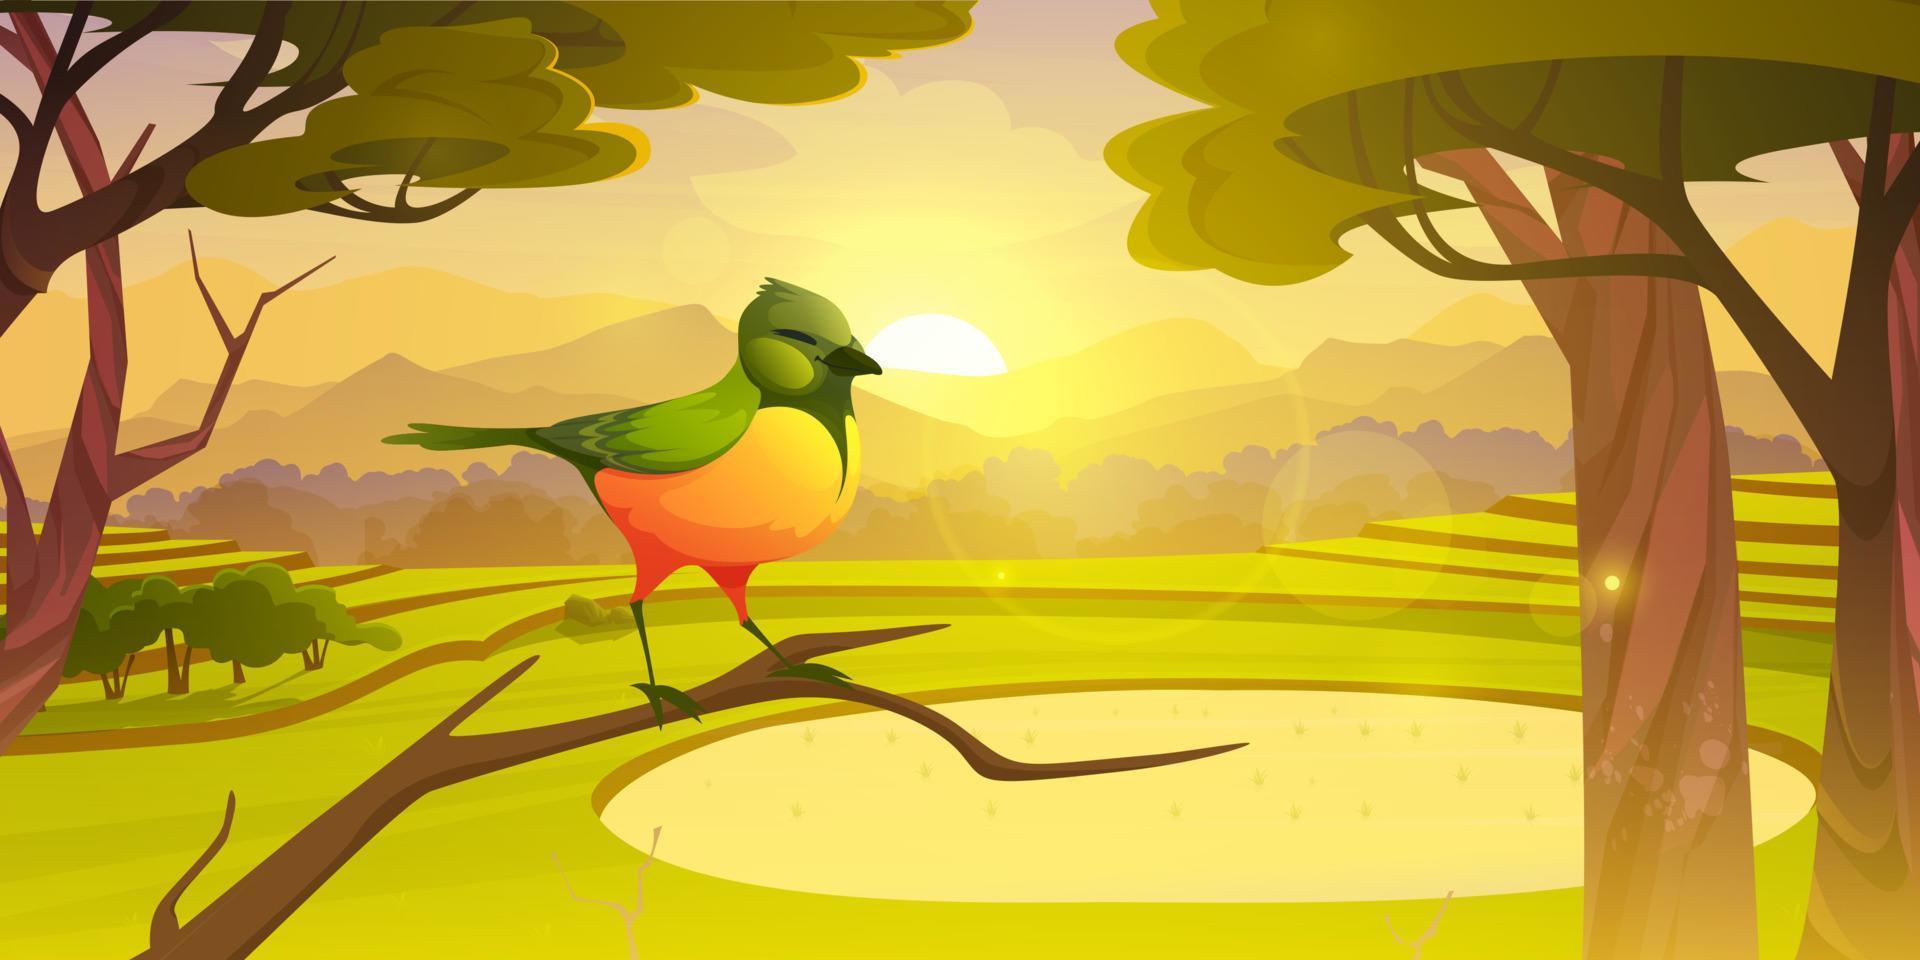 Sunrise in forest with green bird on branch vector